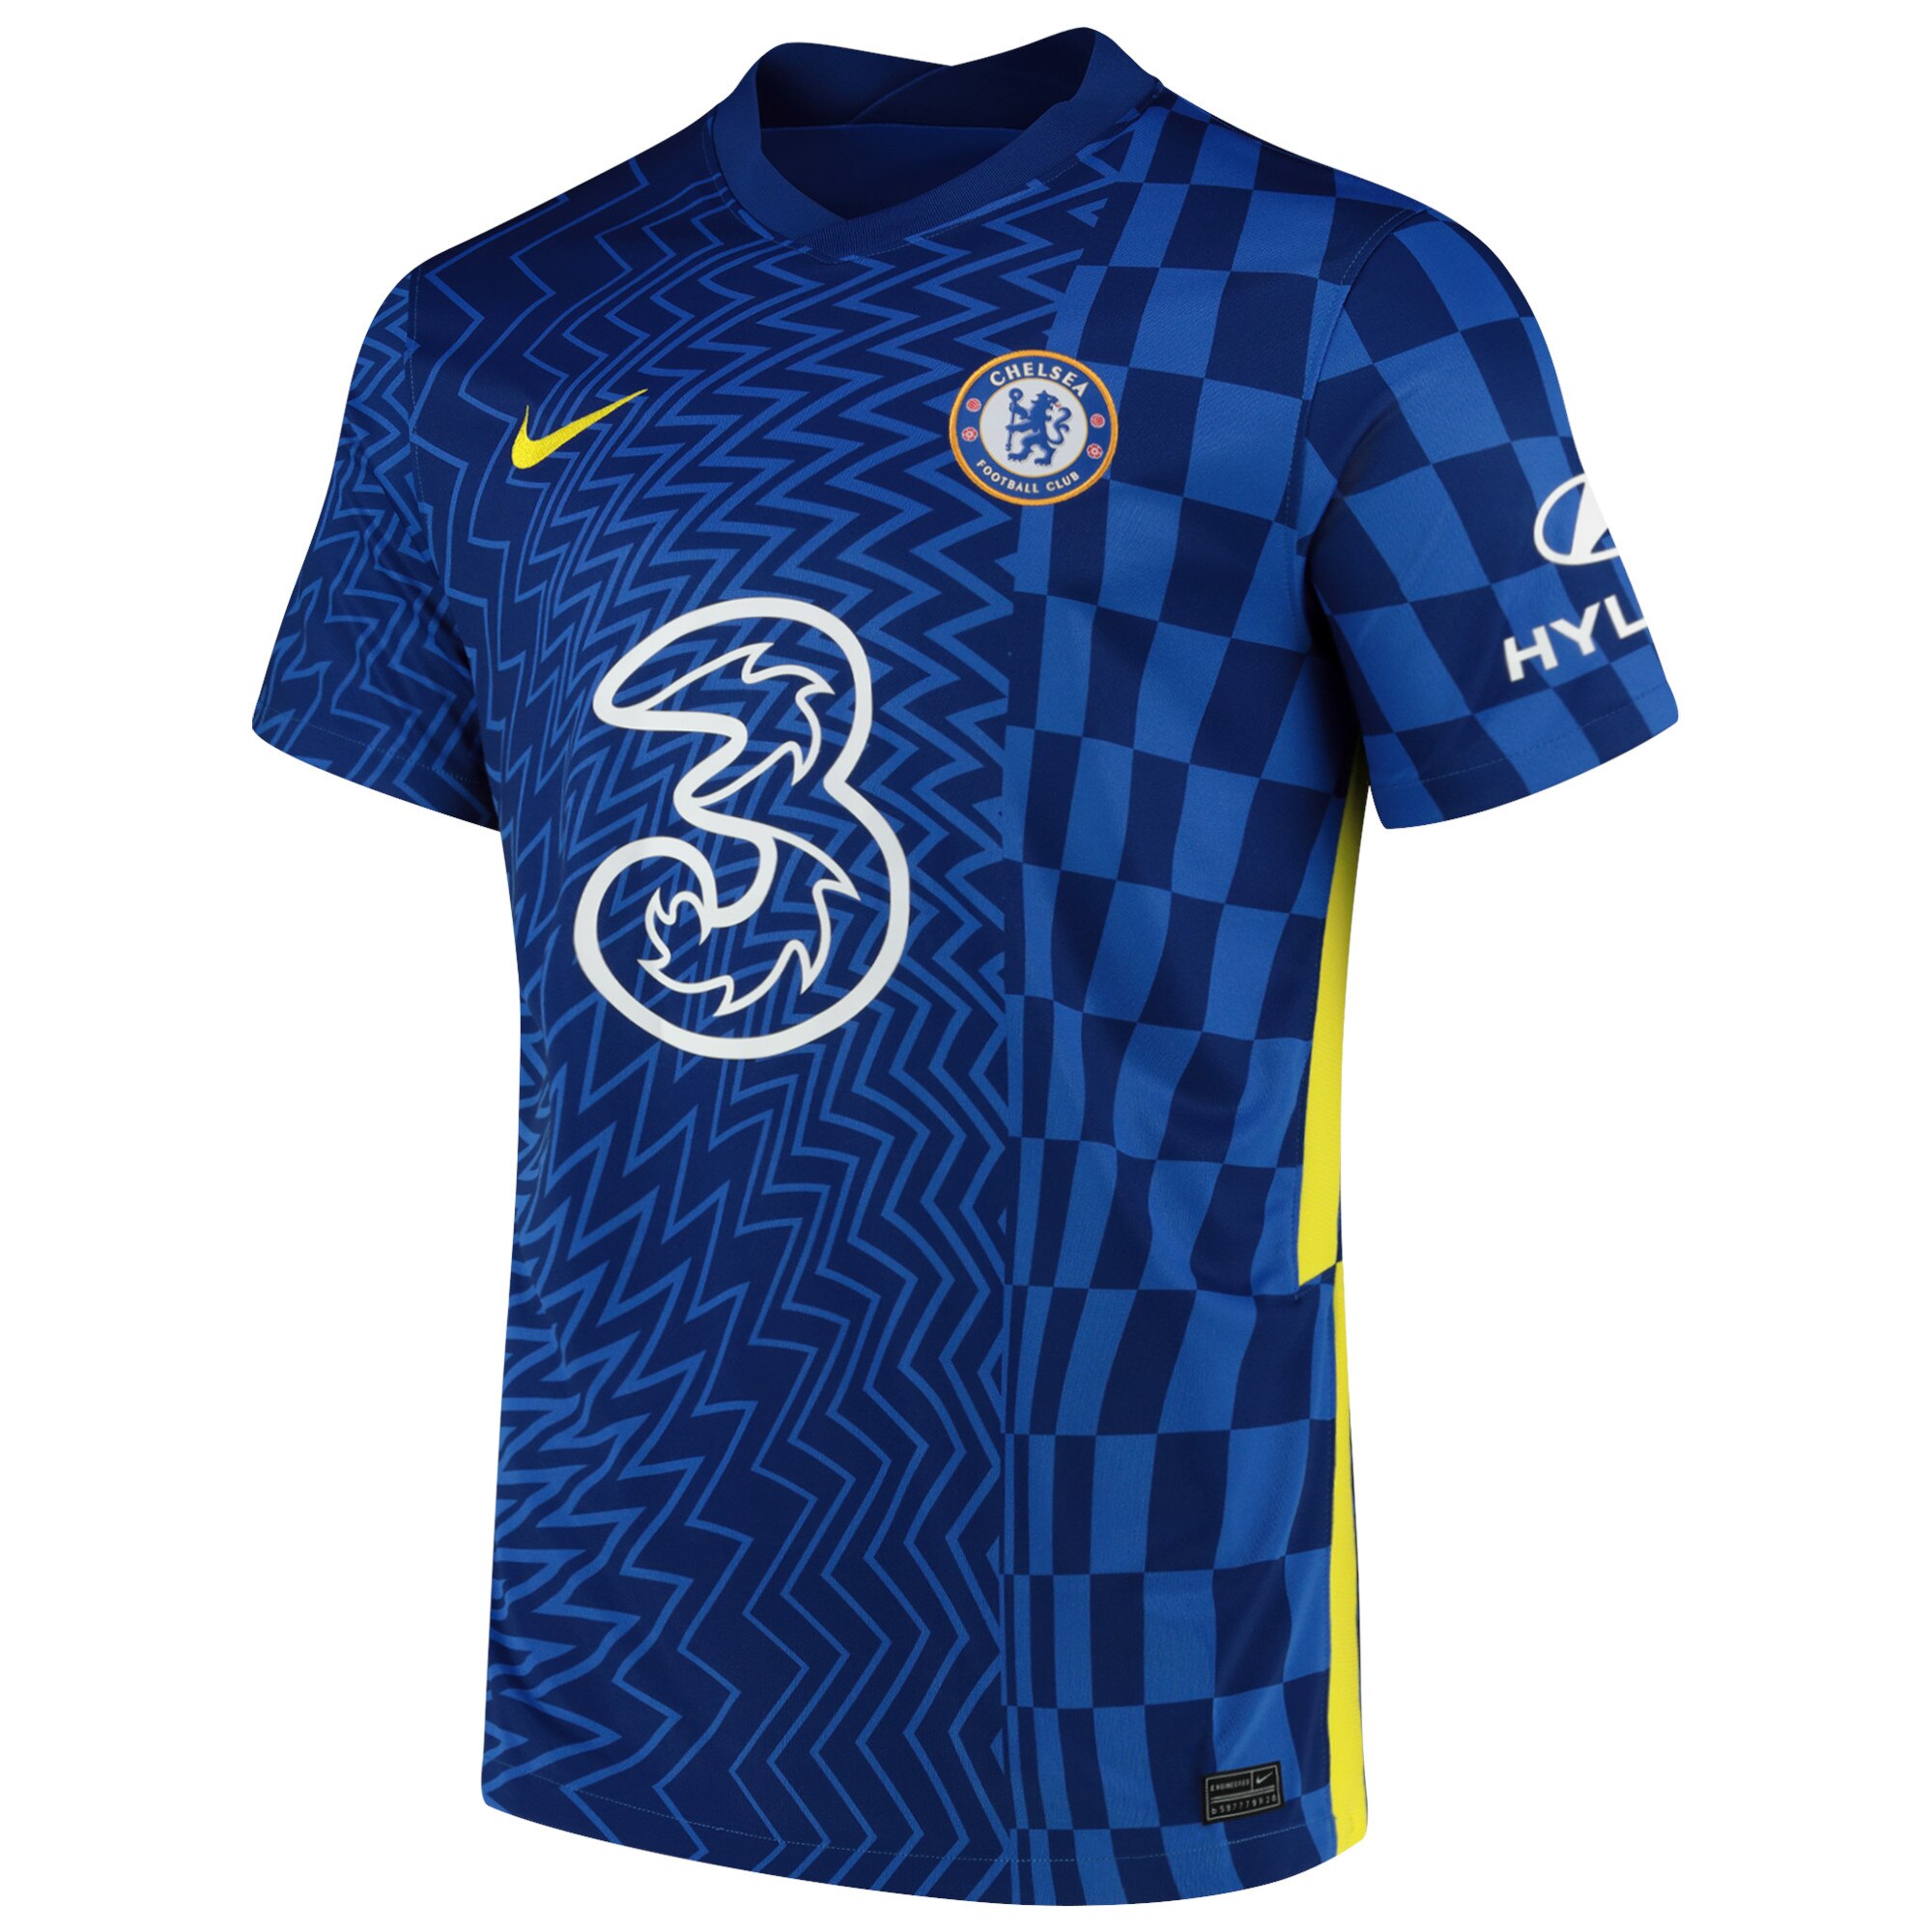 Chelsea Home Stadium Shirt 2021-22 with Chalobah 14 printing